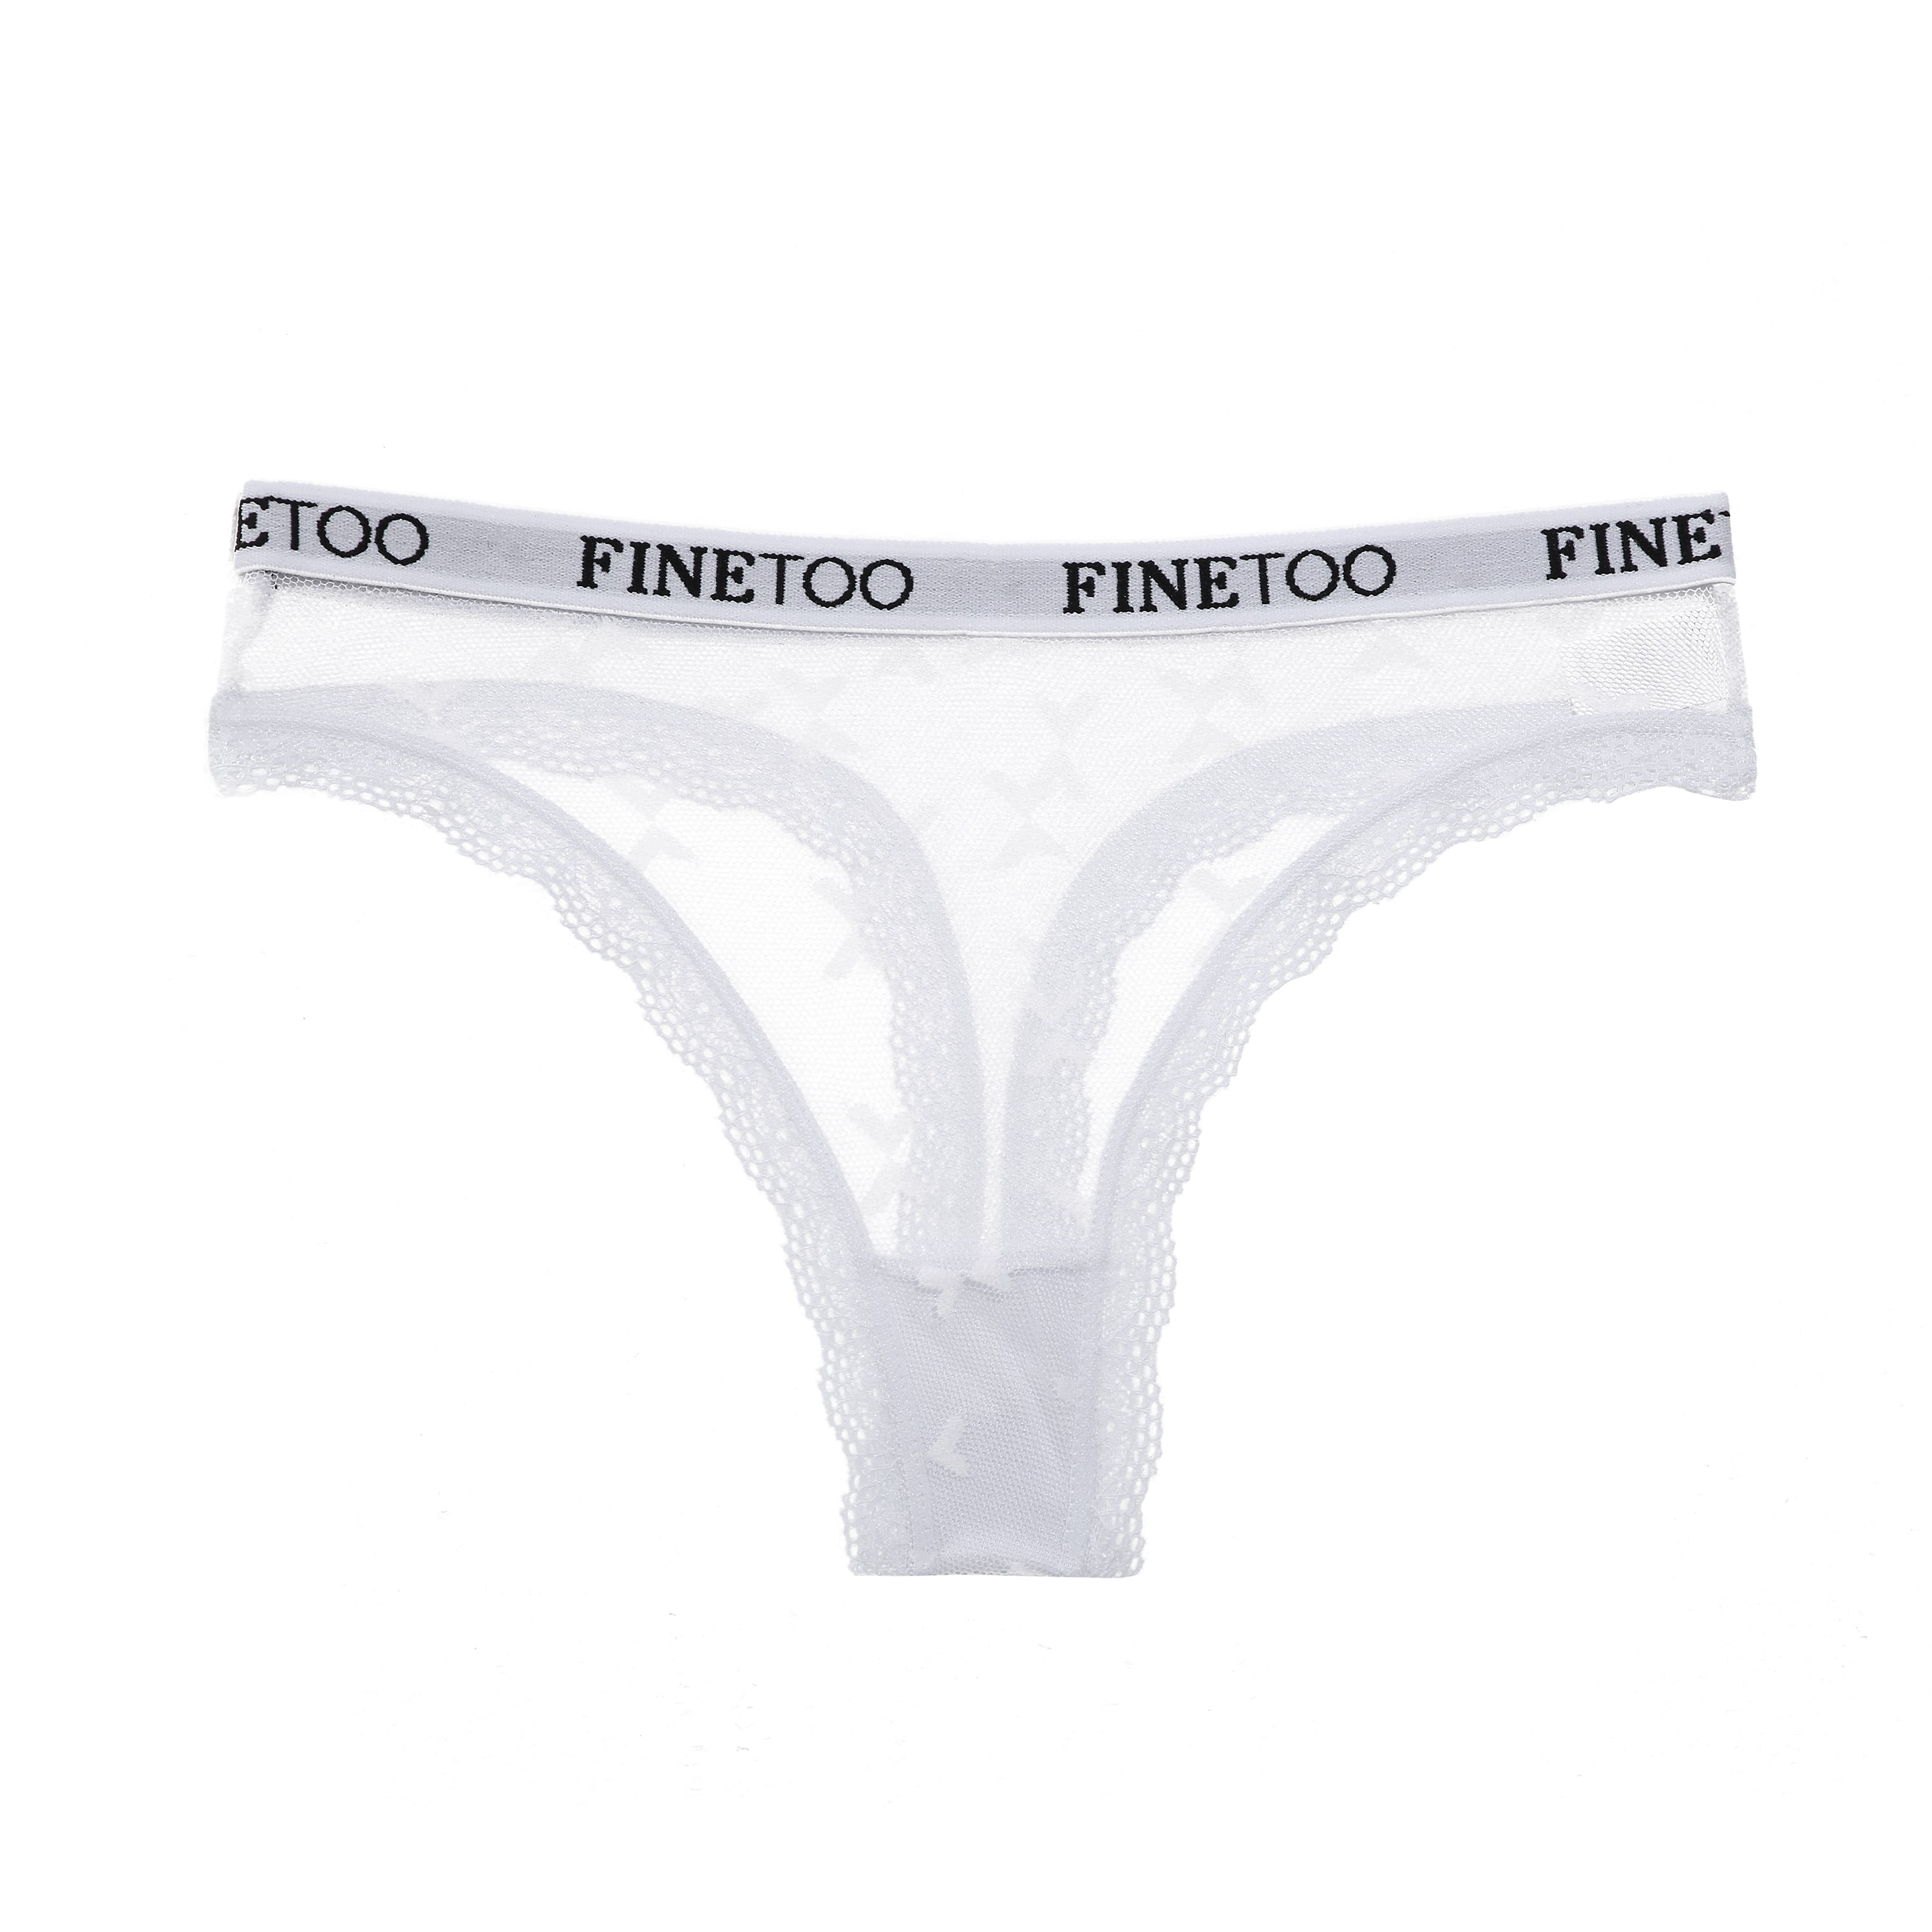 finetoo Official Store - Amazing products with exclusive discounts